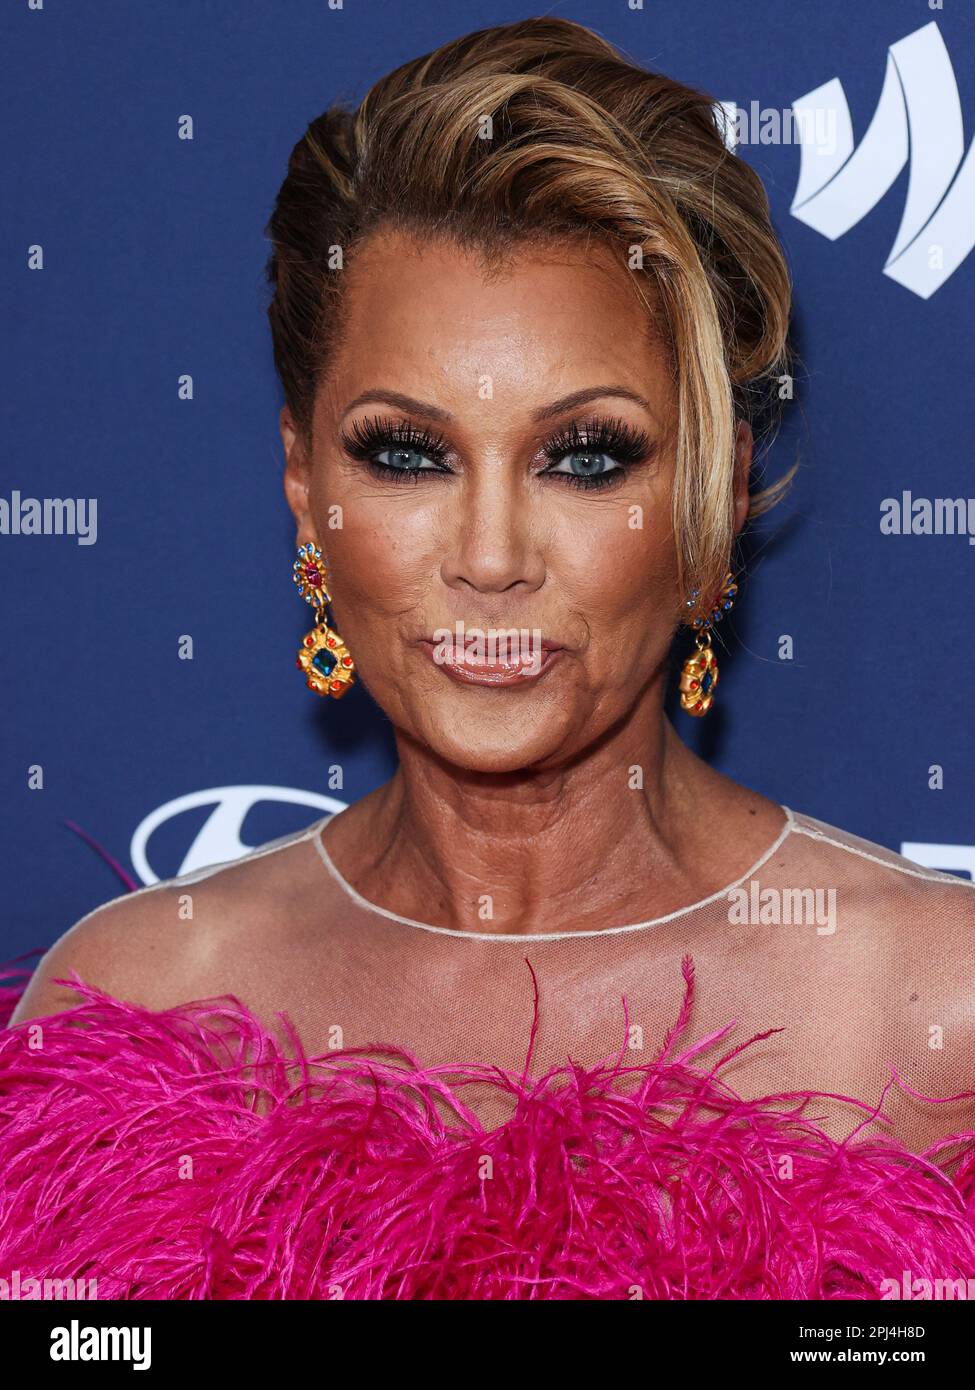 Beverly Hills, United States. 30th Mar, 2023. BEVERLY HILLS, LOS ANGELES, CALIFORNIA, USA - MARCH 30: American singer, actress and fashion designer Vanessa Williams arrives at the 34th Annual GLAAD Media Awards Los Angeles held at The Beverly Hilton Hotel on March 30, 2023 in Beverly Hills, Los Angeles, California, United States. (Photo by Xavier Collin/Image Press Agency) Credit: Image Press Agency/Alamy Live News Stock Photo